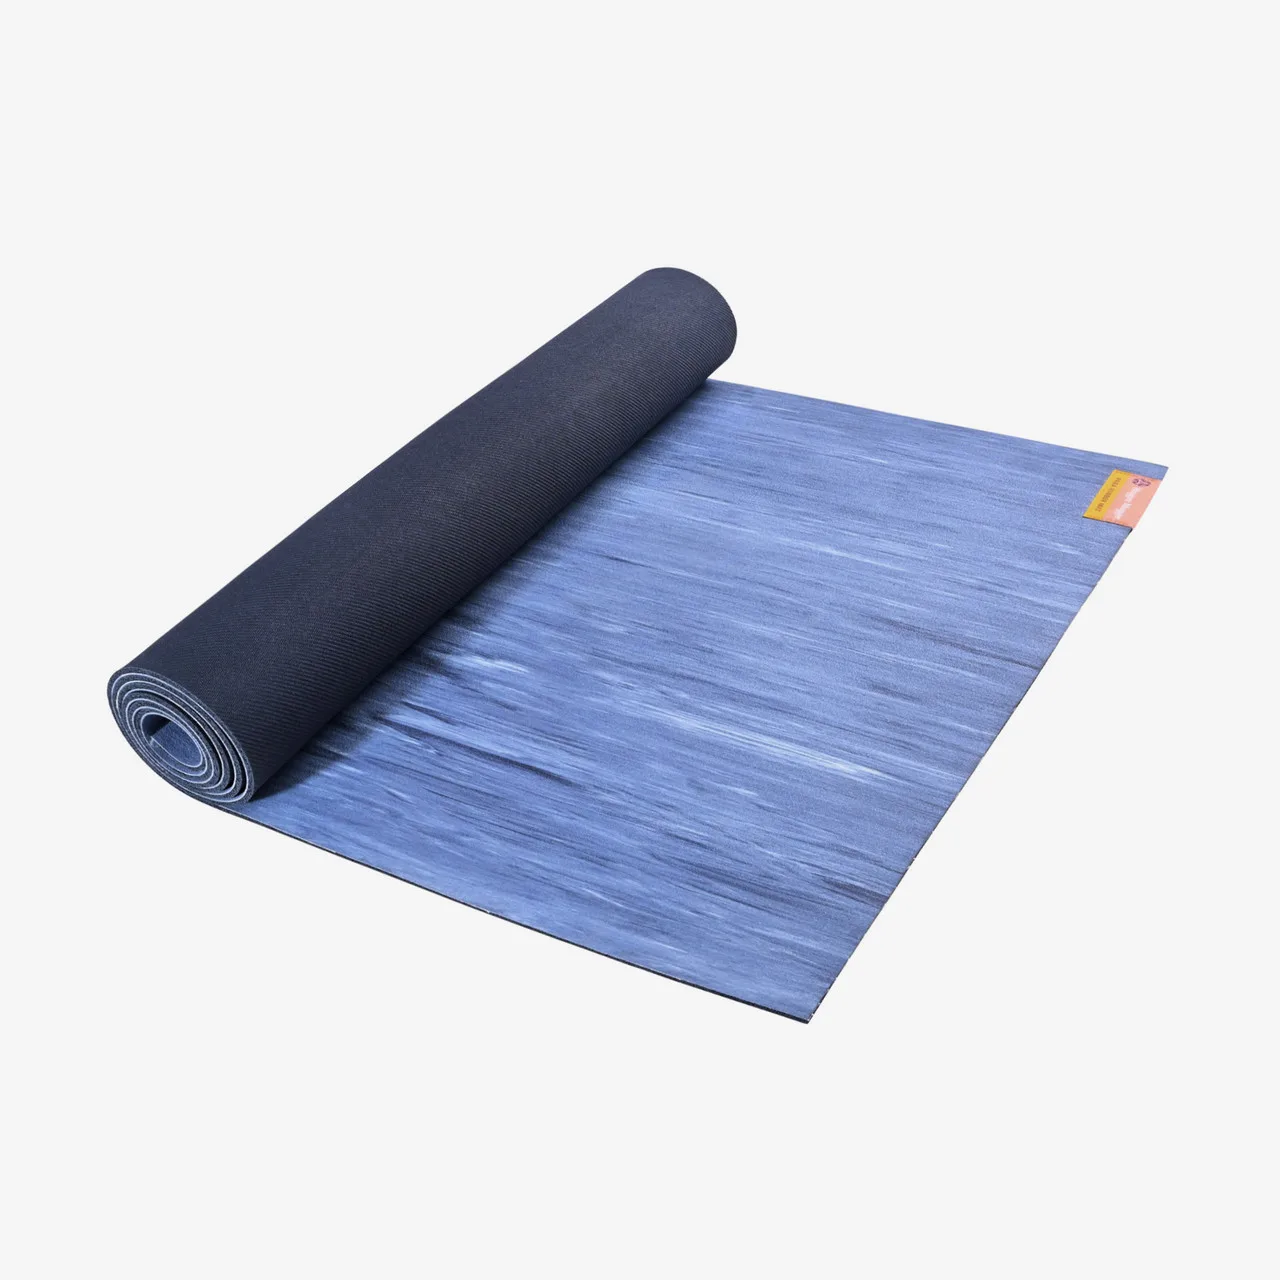 Hugger Mugger Cotton Yoga Rug - Absorbent, Grippy Tight Weave, Ashtanga and  Hot Yoga Rug, Helps with Slippery Hands and Feet